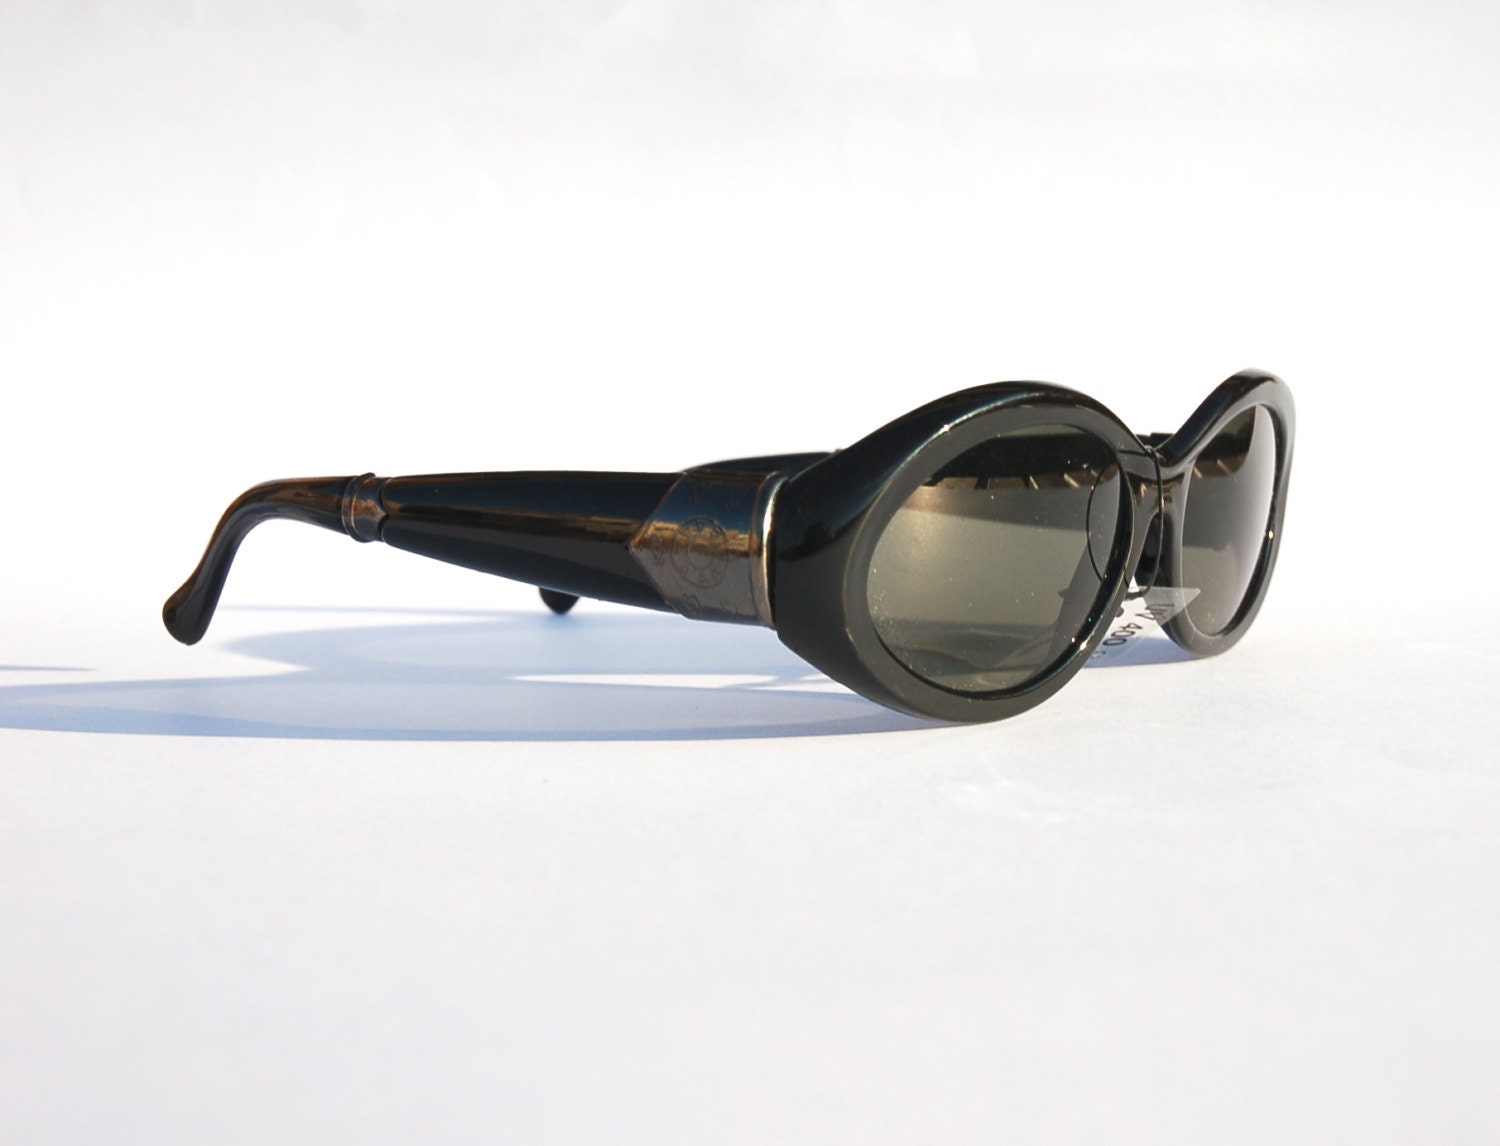 Vintage 90s Oval Sunglasses W Black Frame And Amazing Metal 